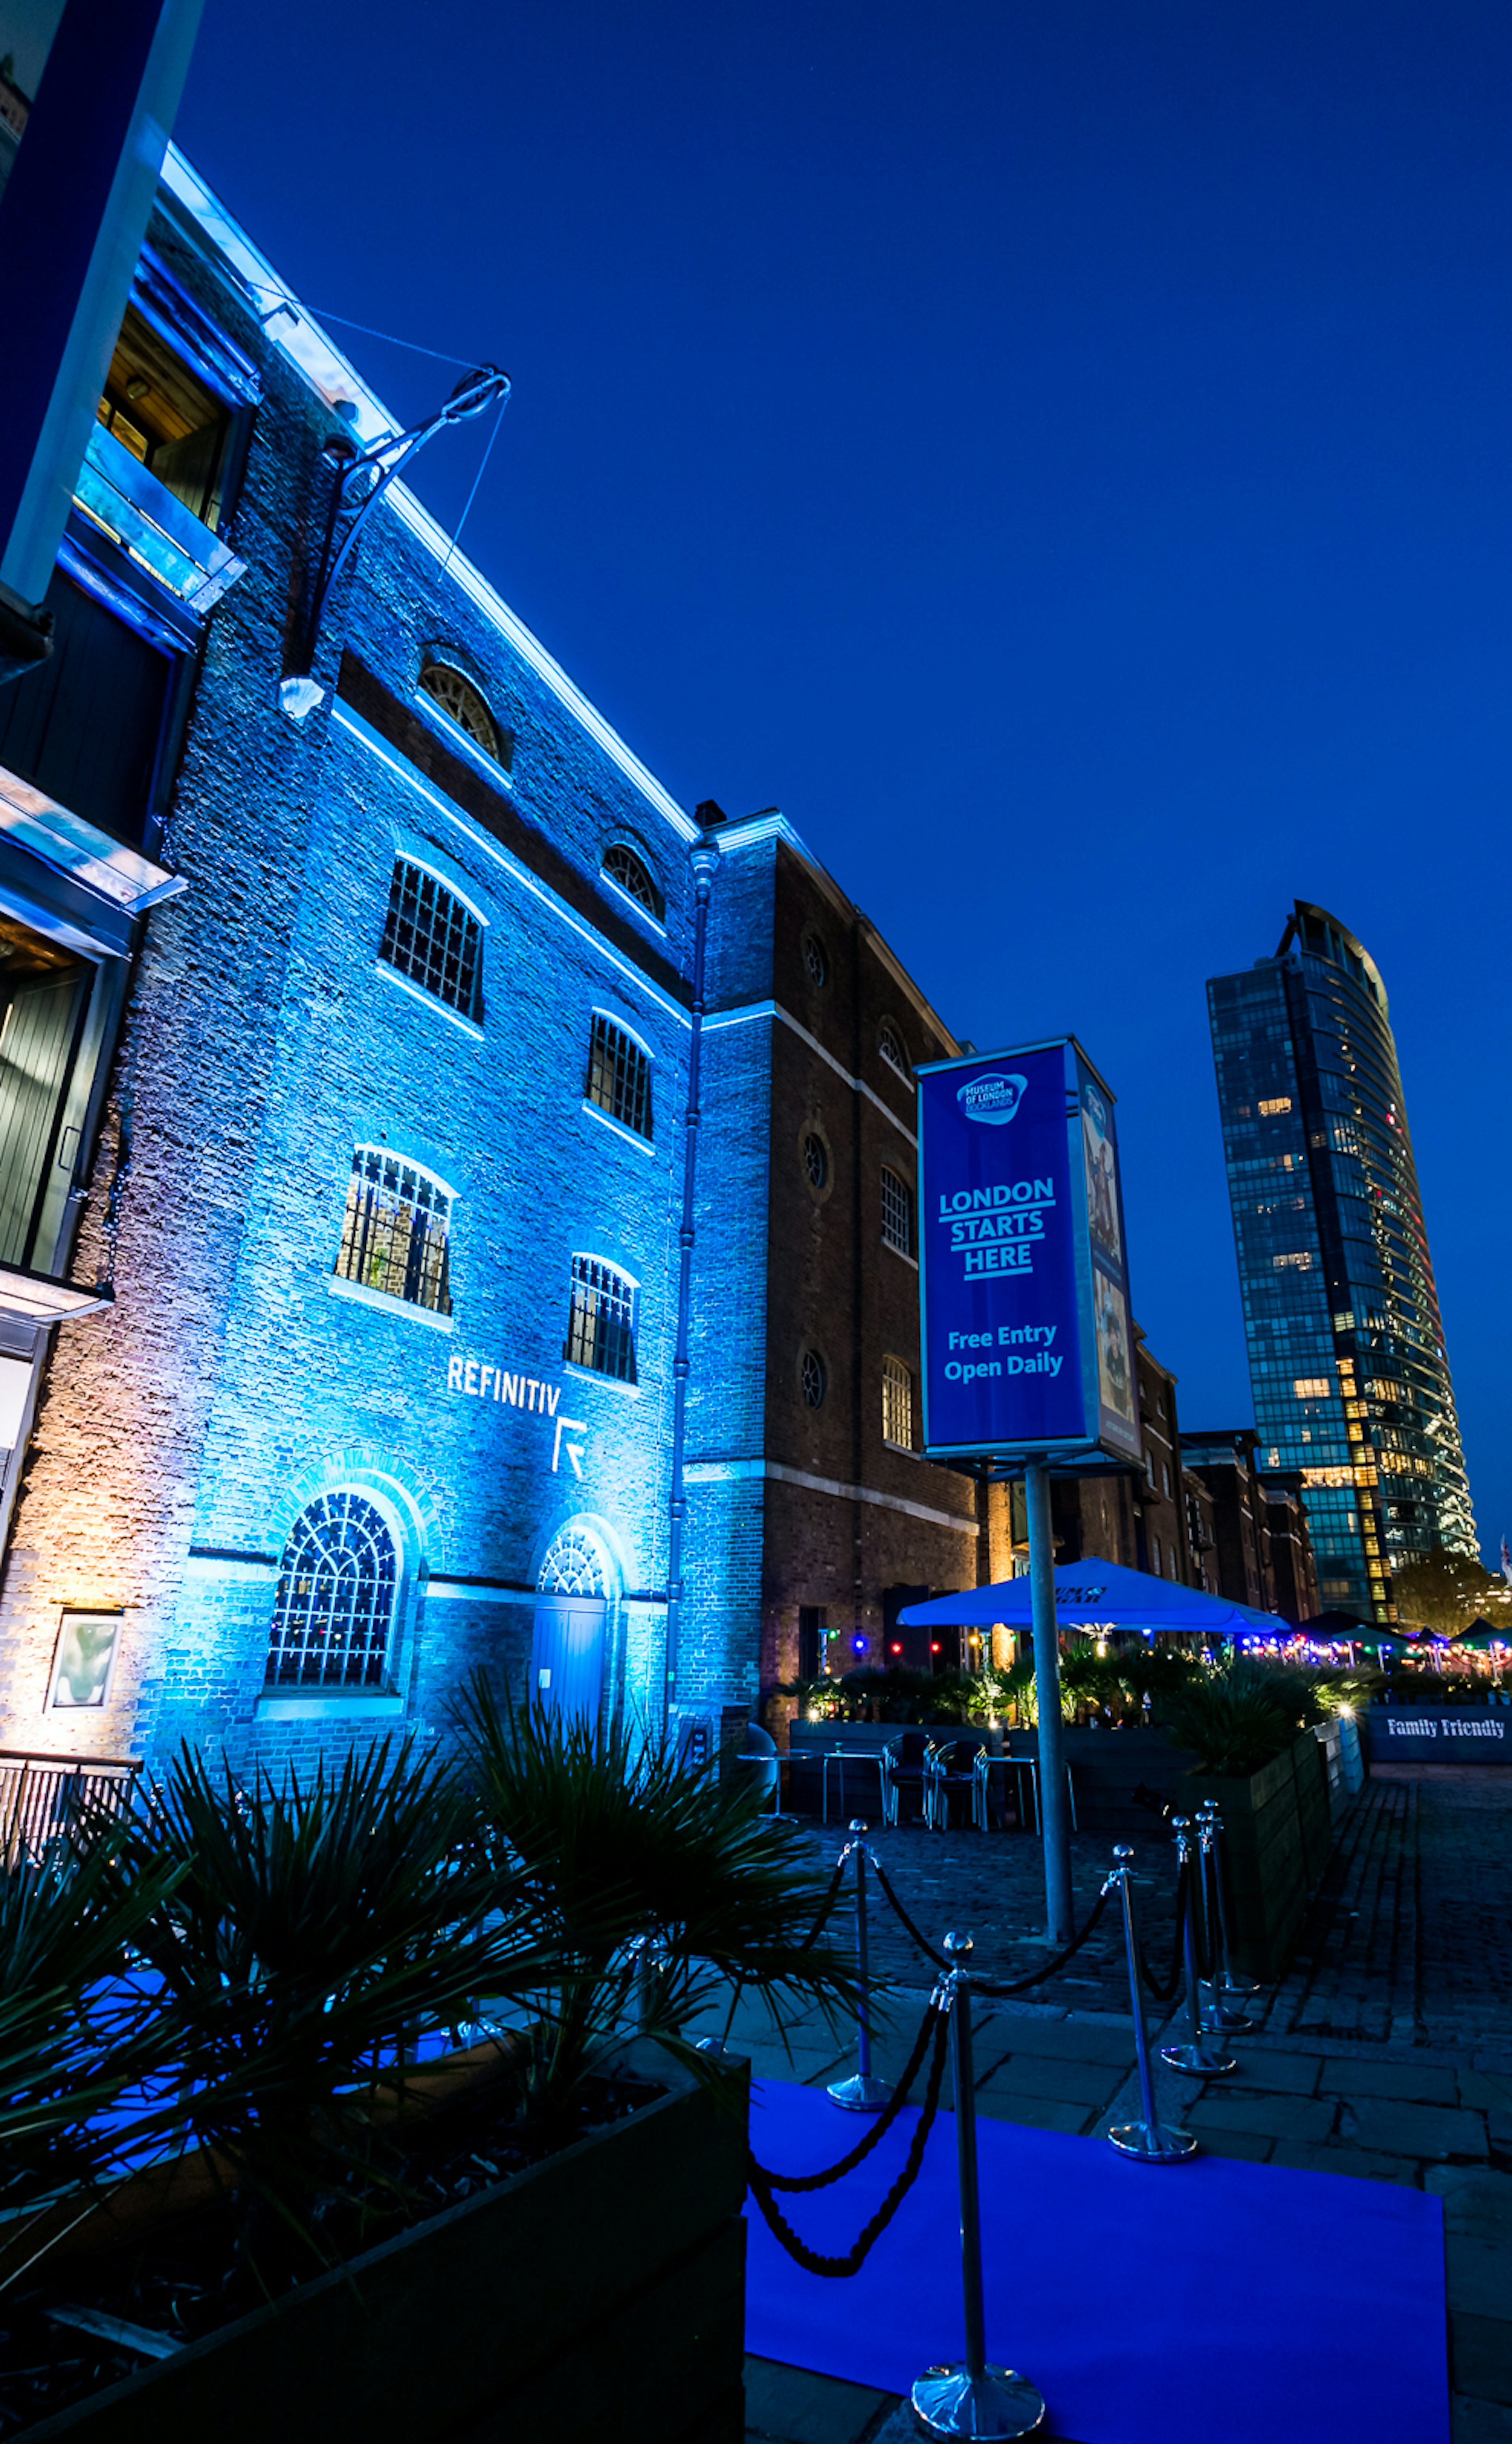 Award Ceremony Venues - Museum of London Docklands